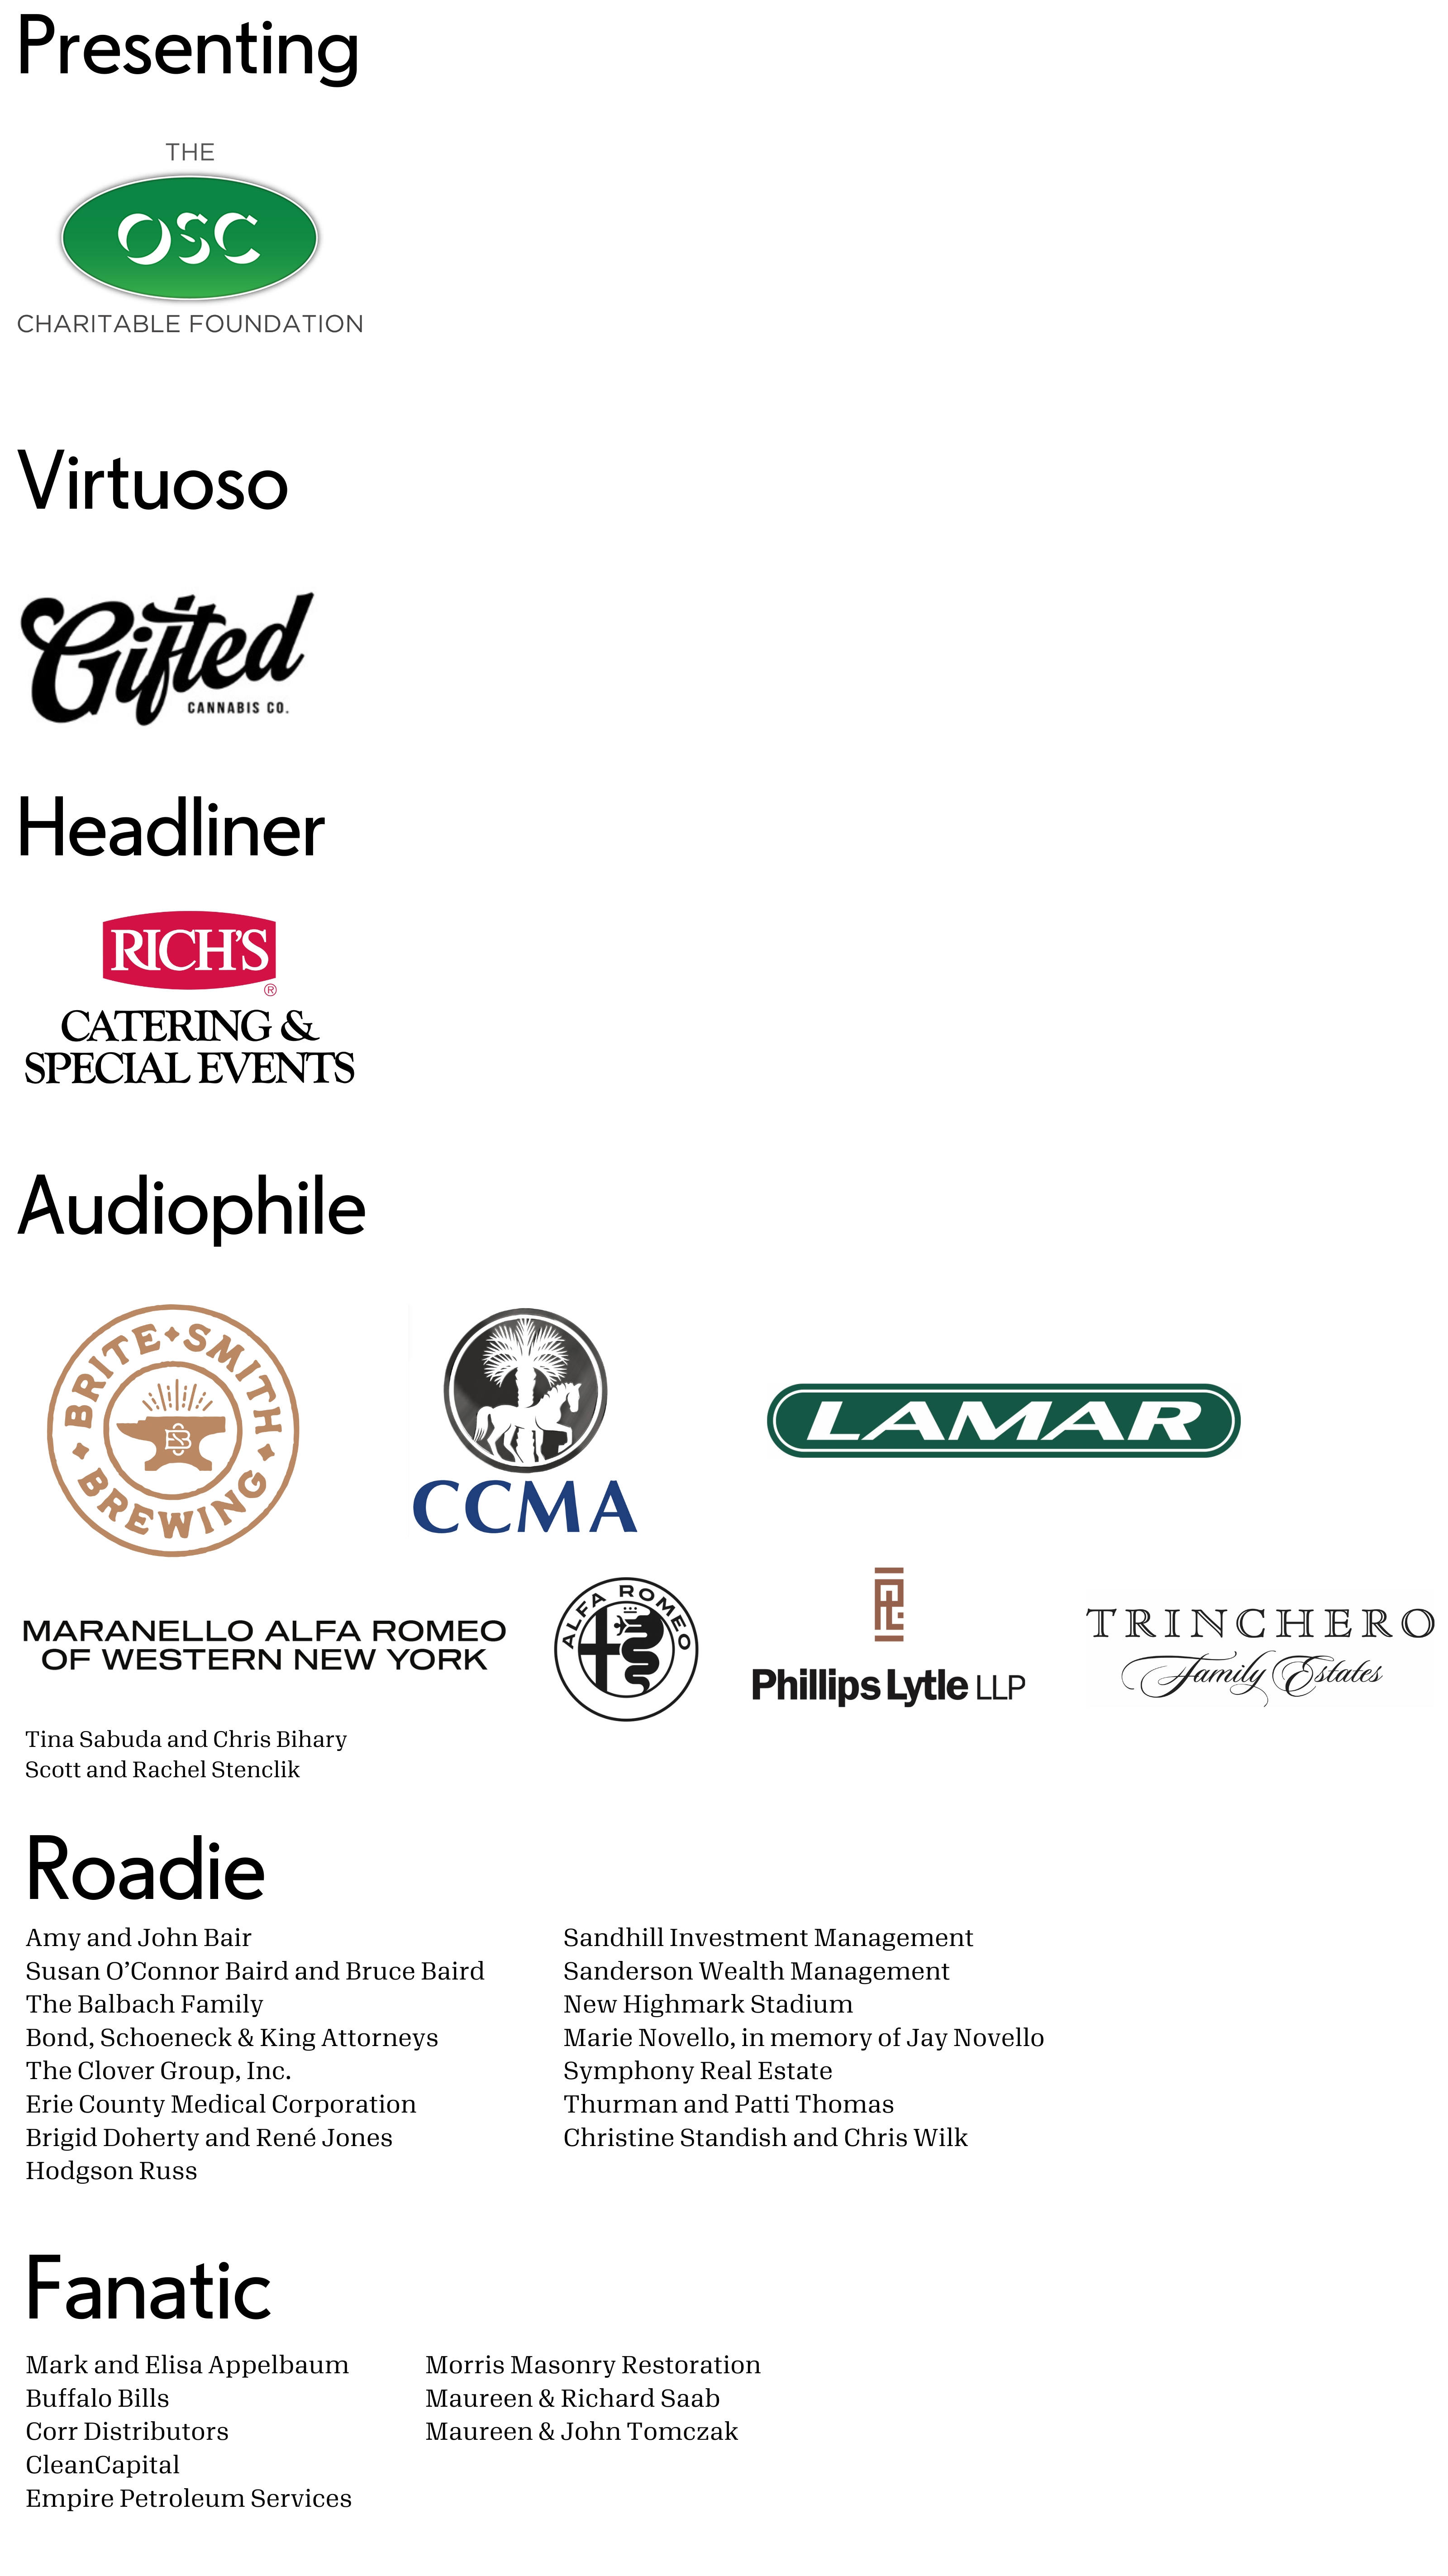 Sponsorships:  Presenting OSC Charitable Foundation (logo)  Headliner Rich’s Catering and Special Events  Virtuoso Gifted Canna (logo)  Audiophile Aleron (logo) CCMA (logo) Maranello Alfa Romeo of WNY Phillips Lytle LLP Trinchero Family Estates  Roadie Amy and John Bair Susan O’Connor Baird and Bruce Baird The Balbach Family Clover Group Hodgson Russ Sandhill Investment Management Sanderson Wealth Management  Symphony Real Estate  Thurman and Patti Thomas   Fanatic Mark and Elisa Appelbaum Corr Distributors CleanCapital Empire Petroleum Services